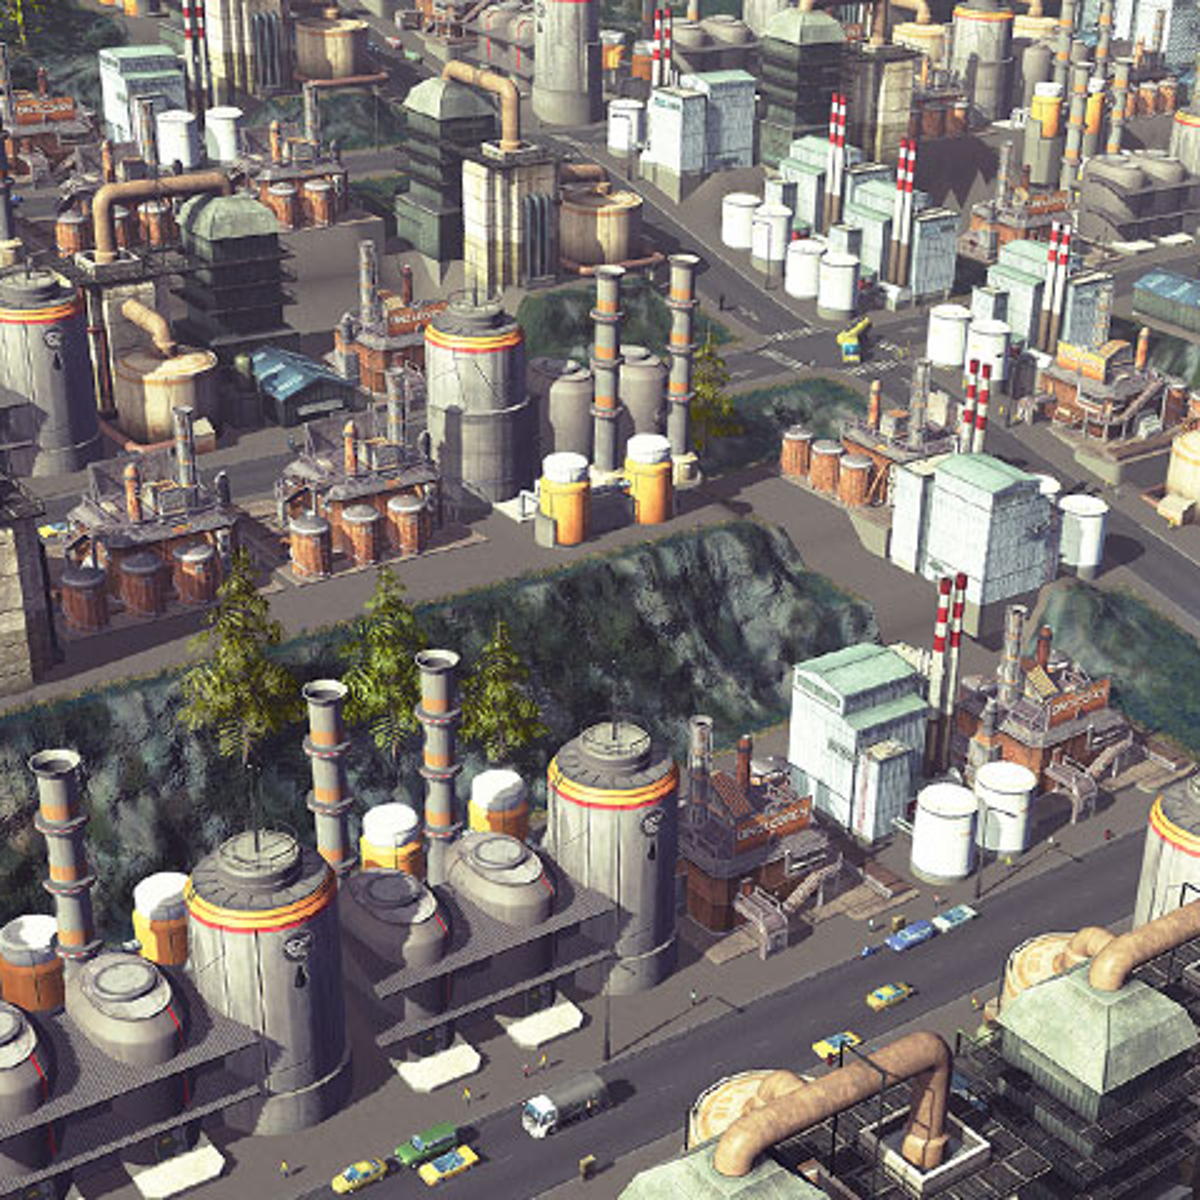 Cities: Skylines is the fastest-selling Paradox game to date